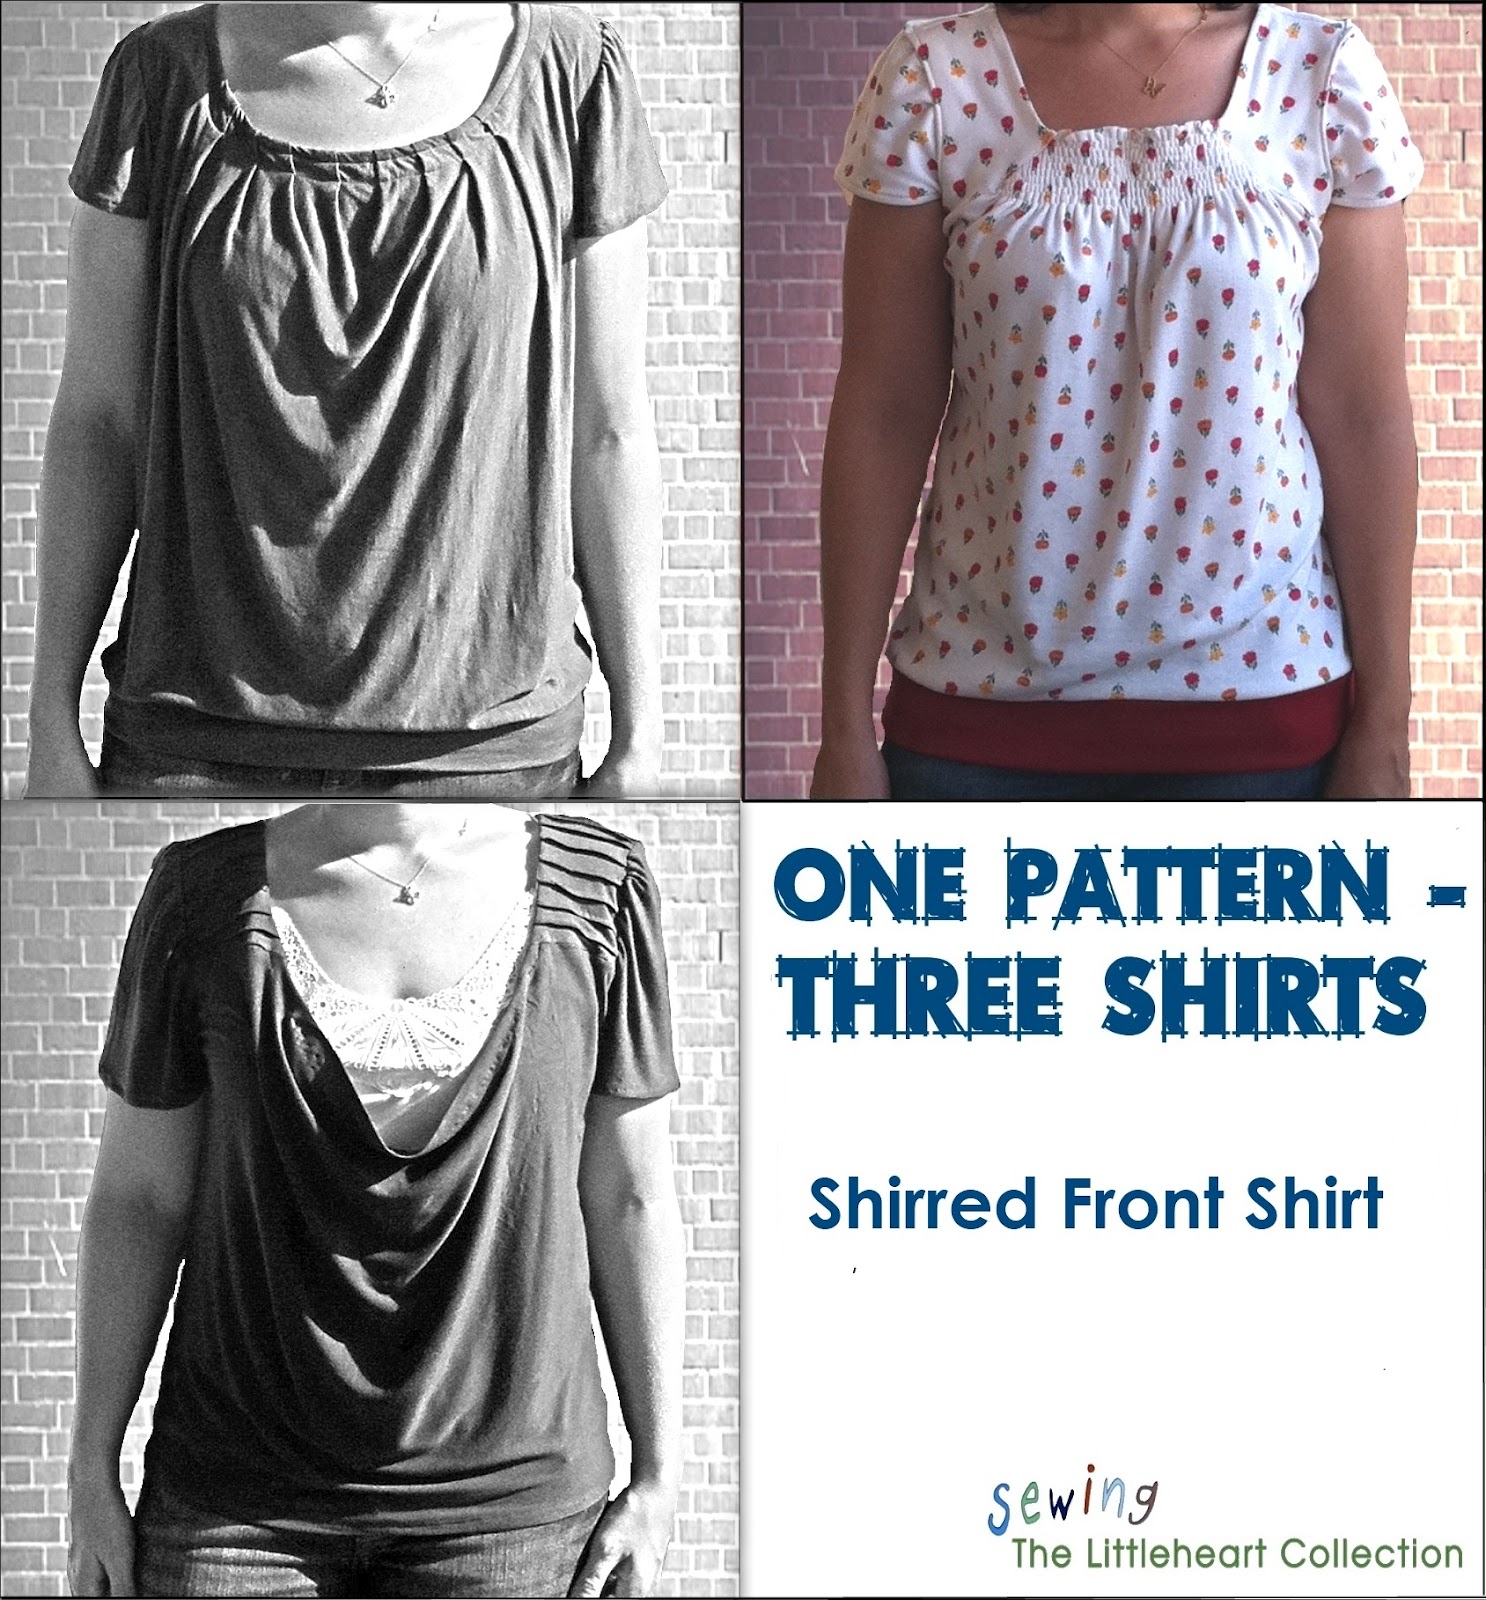 Sewing The Littleheart Collection: Shirred Front Shirt